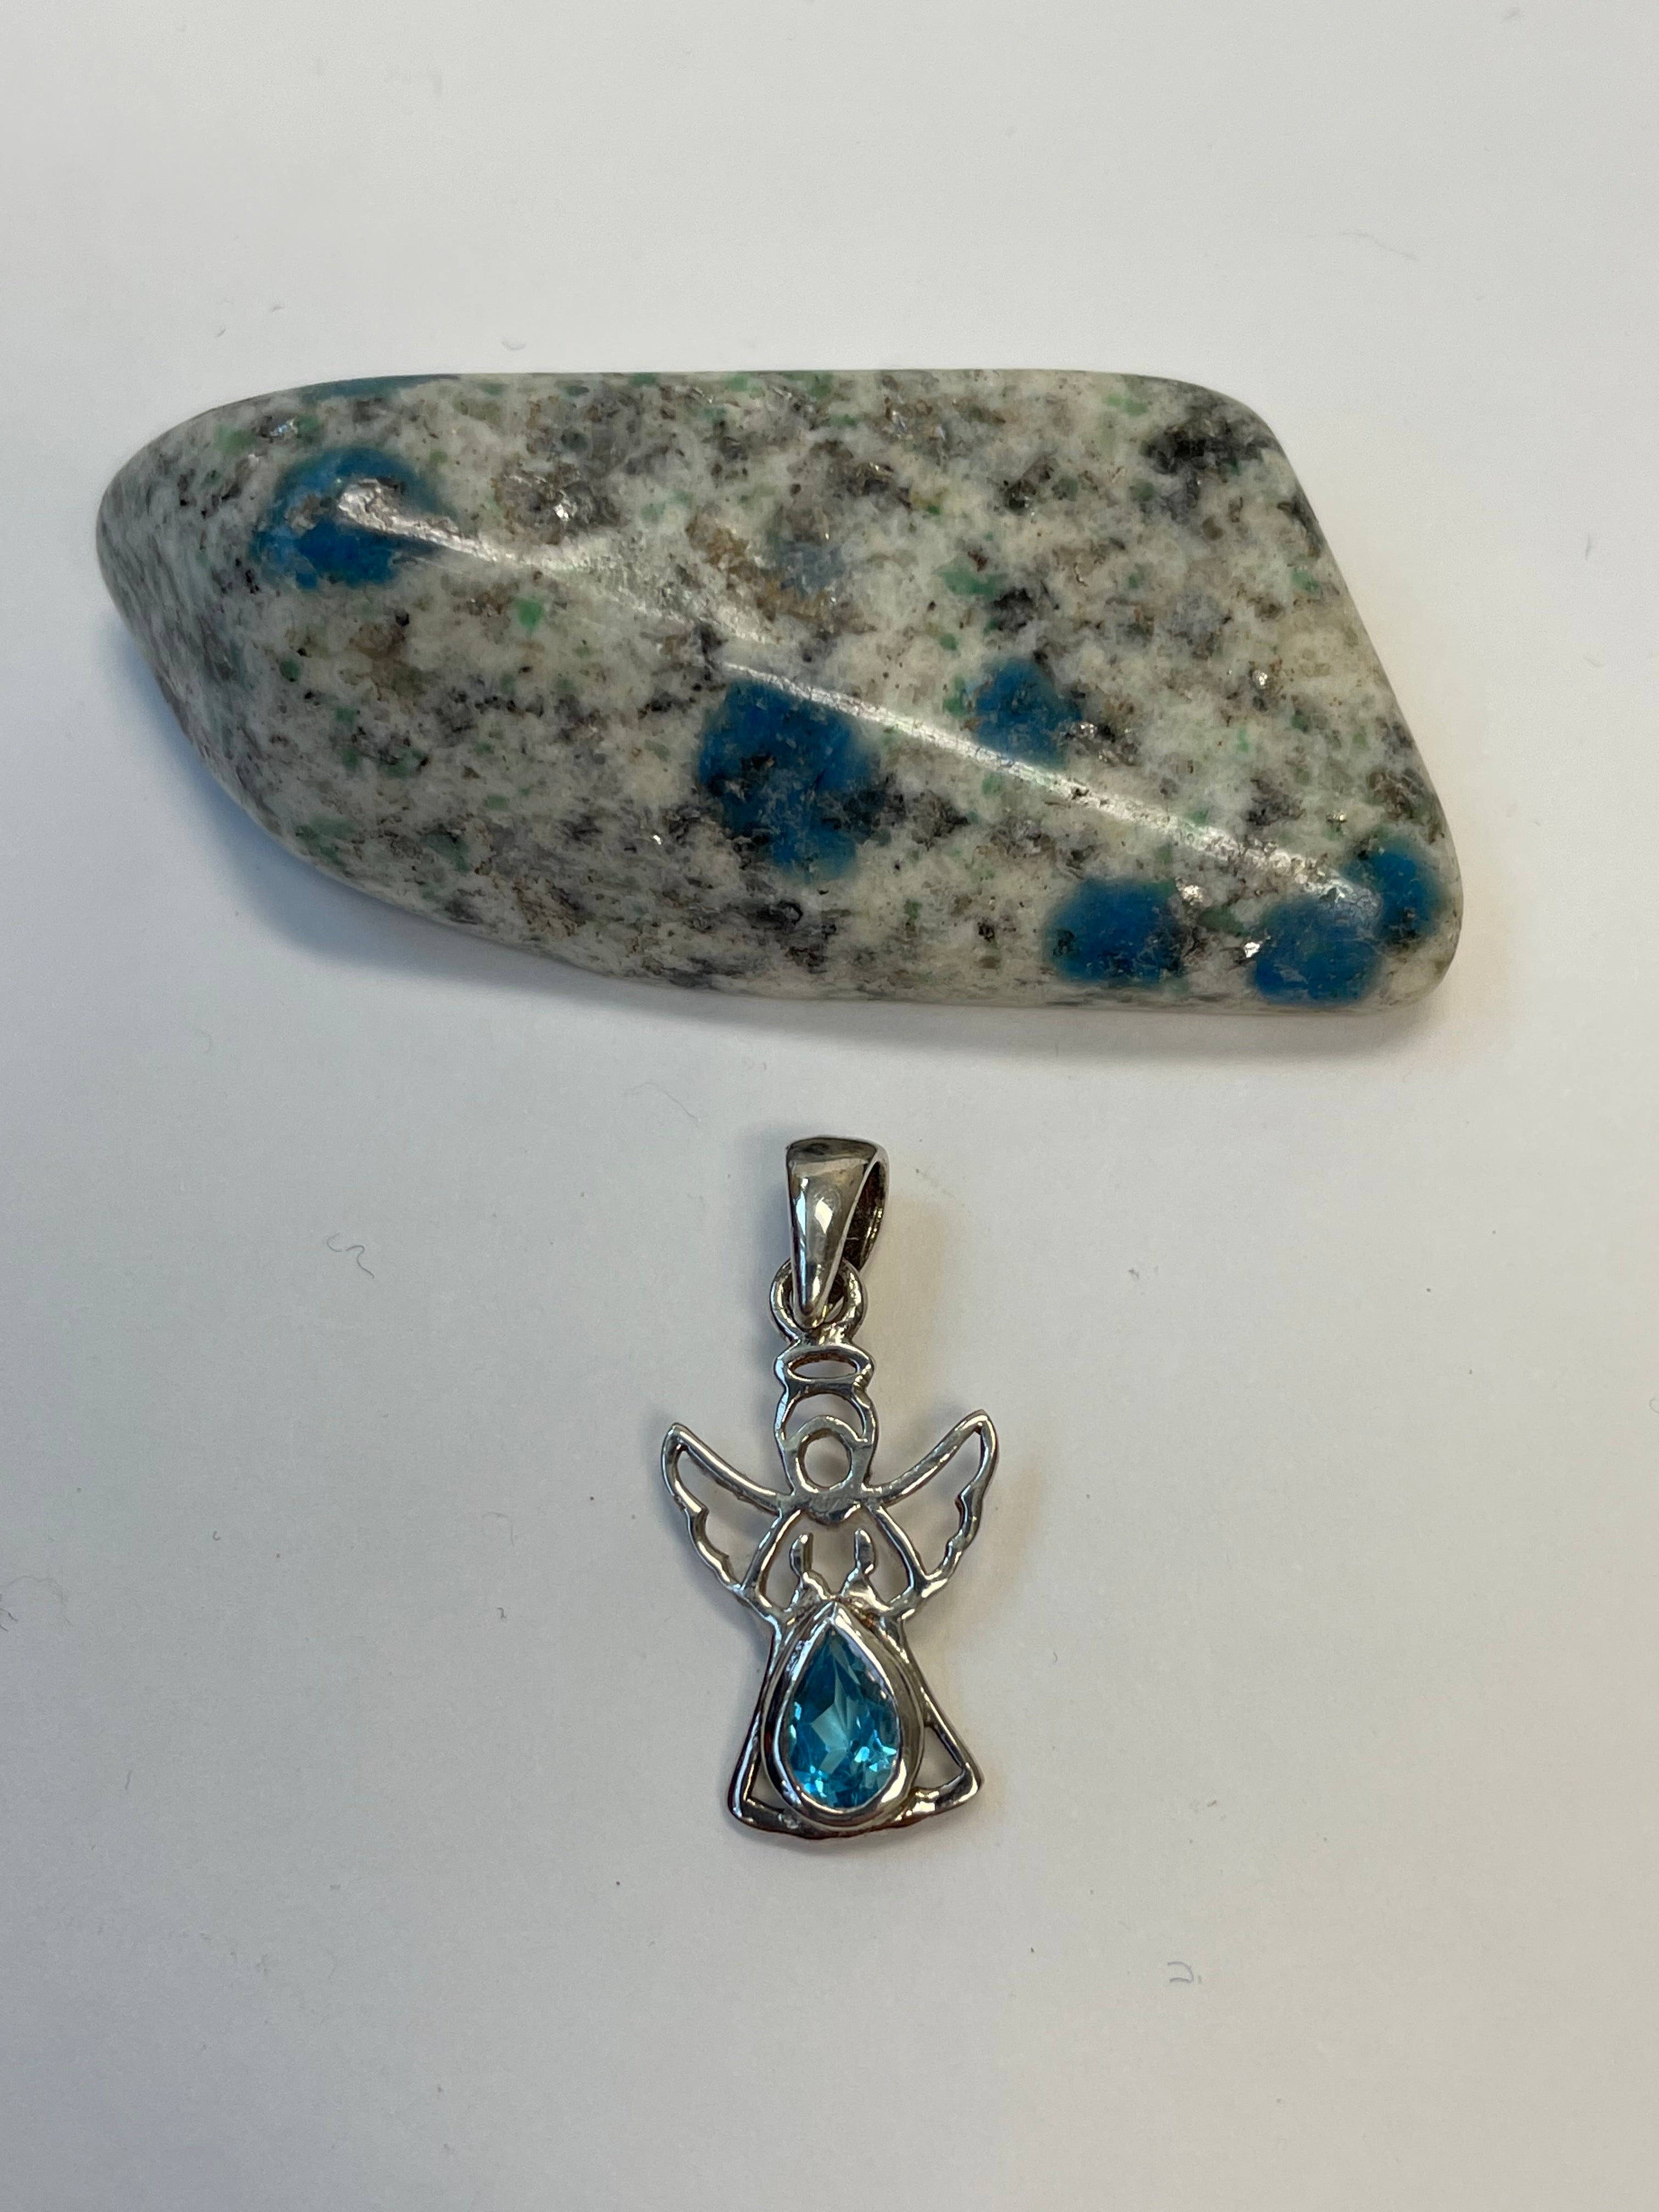 Alternate view. Dainty sterling silver angel pendant with stunning teardrop blue topaz. Blue topaz soothes & relaxes, is a stone of love and manifestation, verbal communication, emotional support and more. The angel reminds us that we are being watched over, always! Pendant is approximately 1" long. Cost is $18.00.